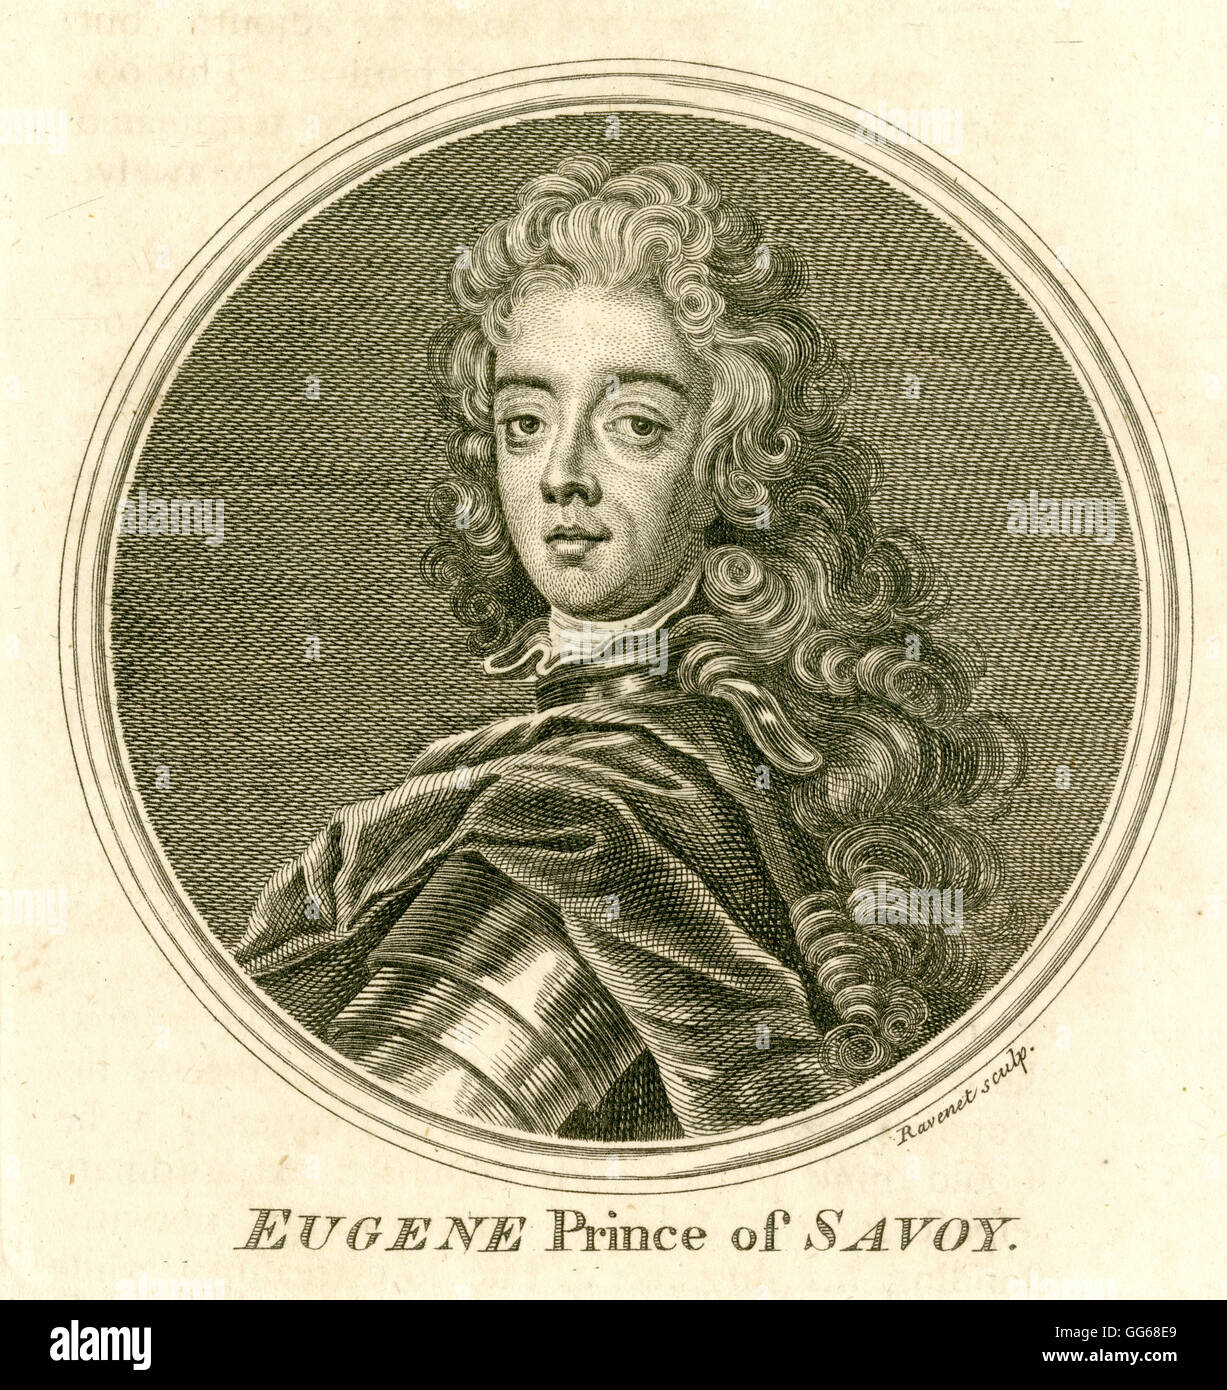 Antique c1790 engraving, Prince Eugene of Savoy. Prince Eugene of Savoy (1663-1736) was a general of the Imperial Army and statesman of the Holy Roman Empire and the Archduchy of Austria and one of the most successful military commanders in modern European history, rising to the highest offices of state at the Imperial court in Vienna. SOURCE: ORIGINAL STEEL ENGRAVING. Stock Photo